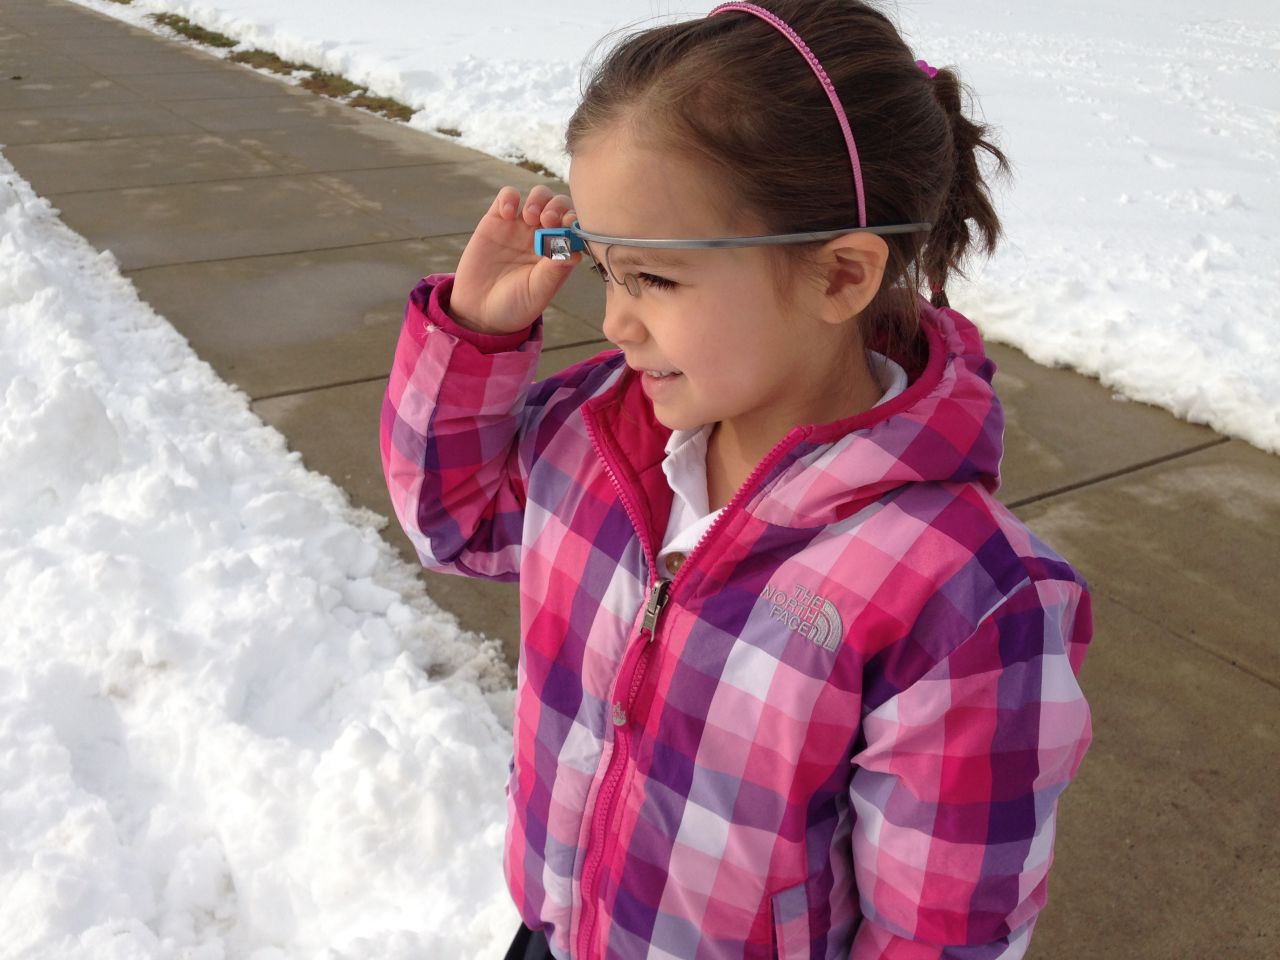 After a recent run of winter weather, kindergarten students at the Episcopal Academy used Google Glass to explain <a href="http://365daysofglass.com/post/75623506999/365-days-of-glass-day-73-today-a-few-of-our" target="_blank" target="_blank">what they know about snowflakes</a>. Powers created a blog, 365 Days of Glass, to record how students and educators at the school are using the product.